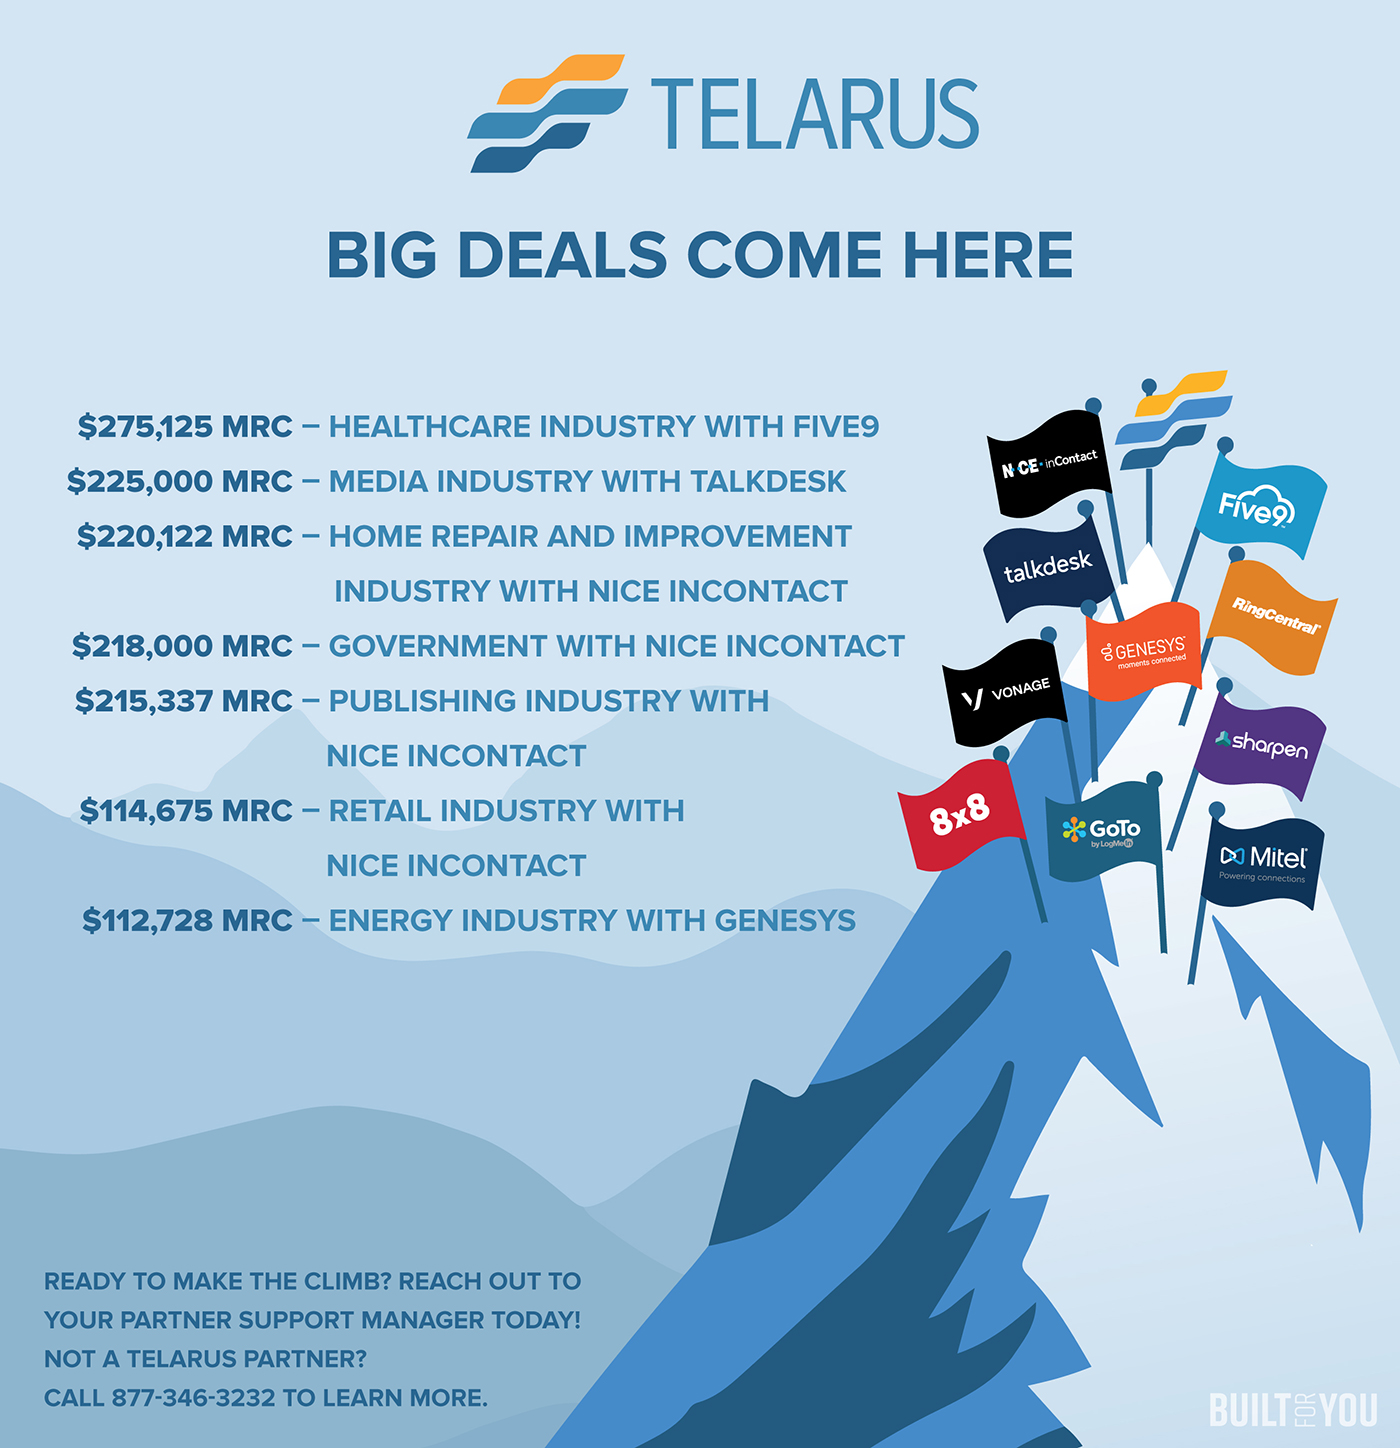 Big Deal Come to Telarus